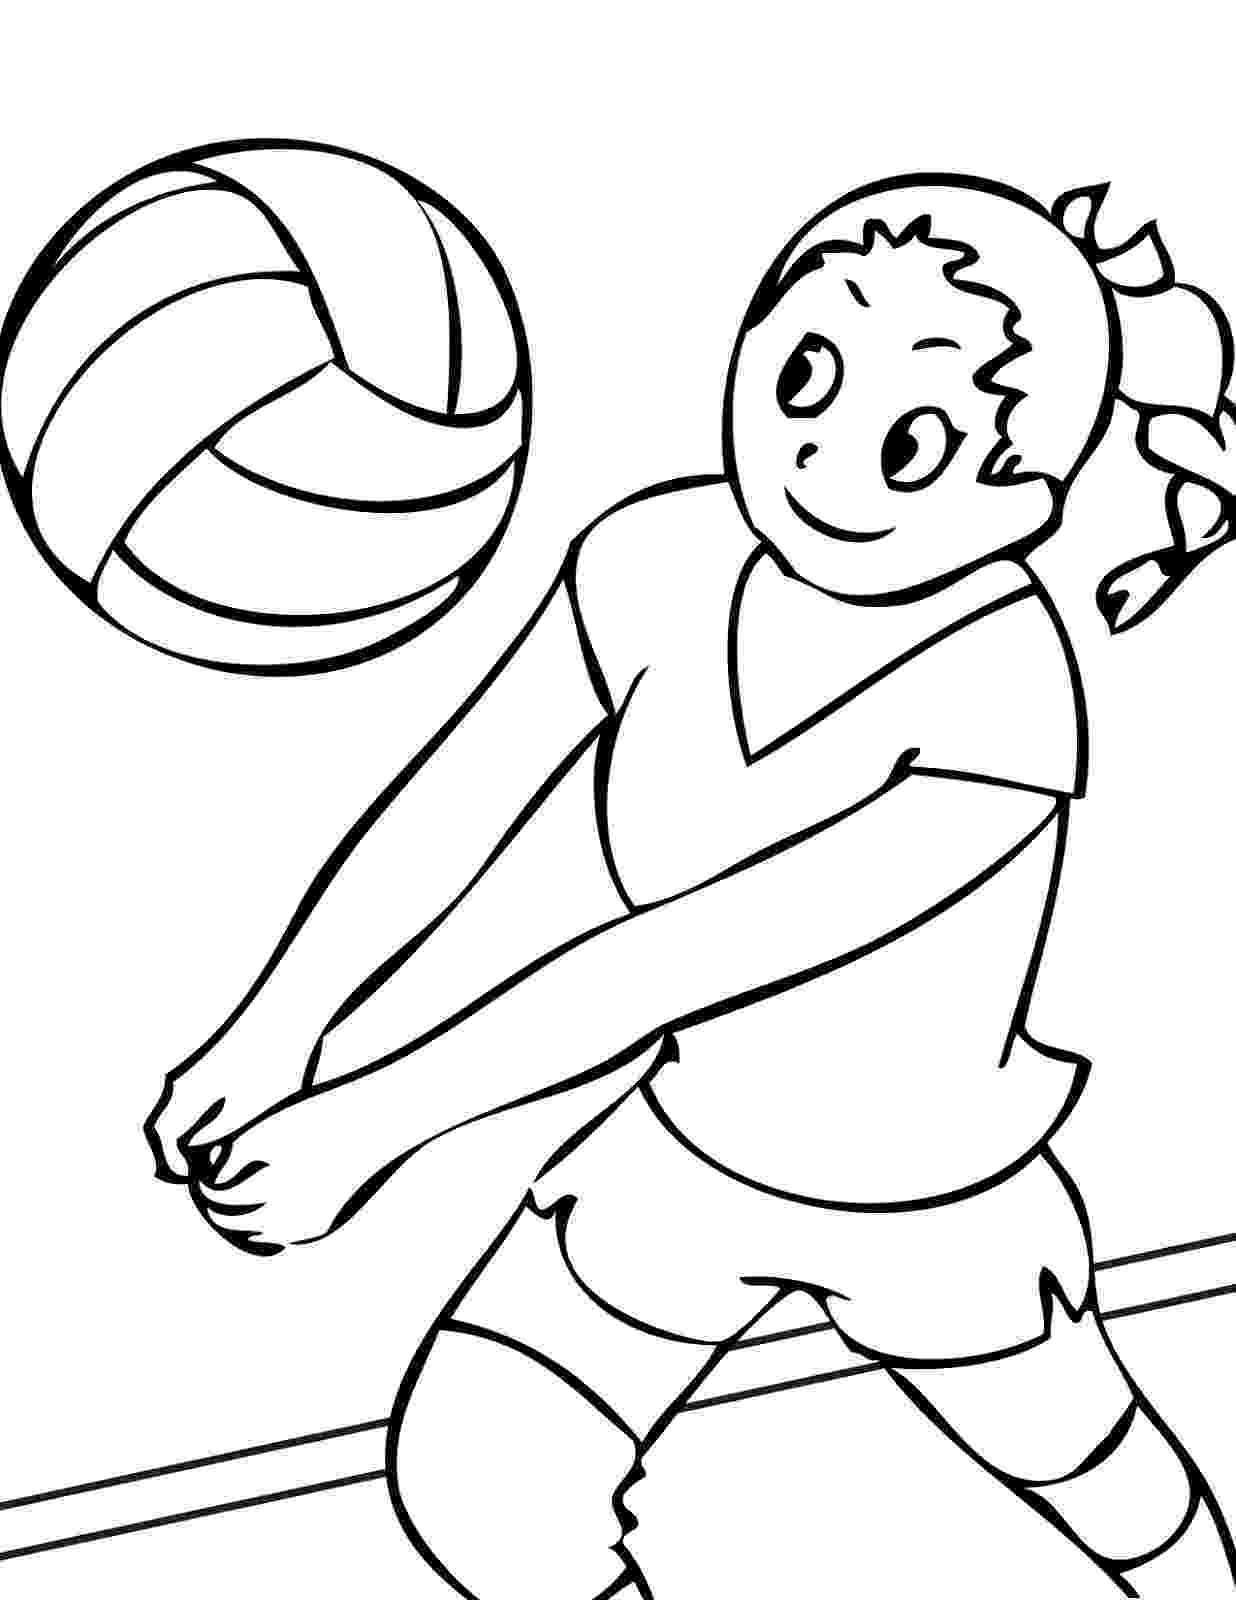 sports coloring pages for kids free printable sports coloring pages for kids coloring for kids pages sports 